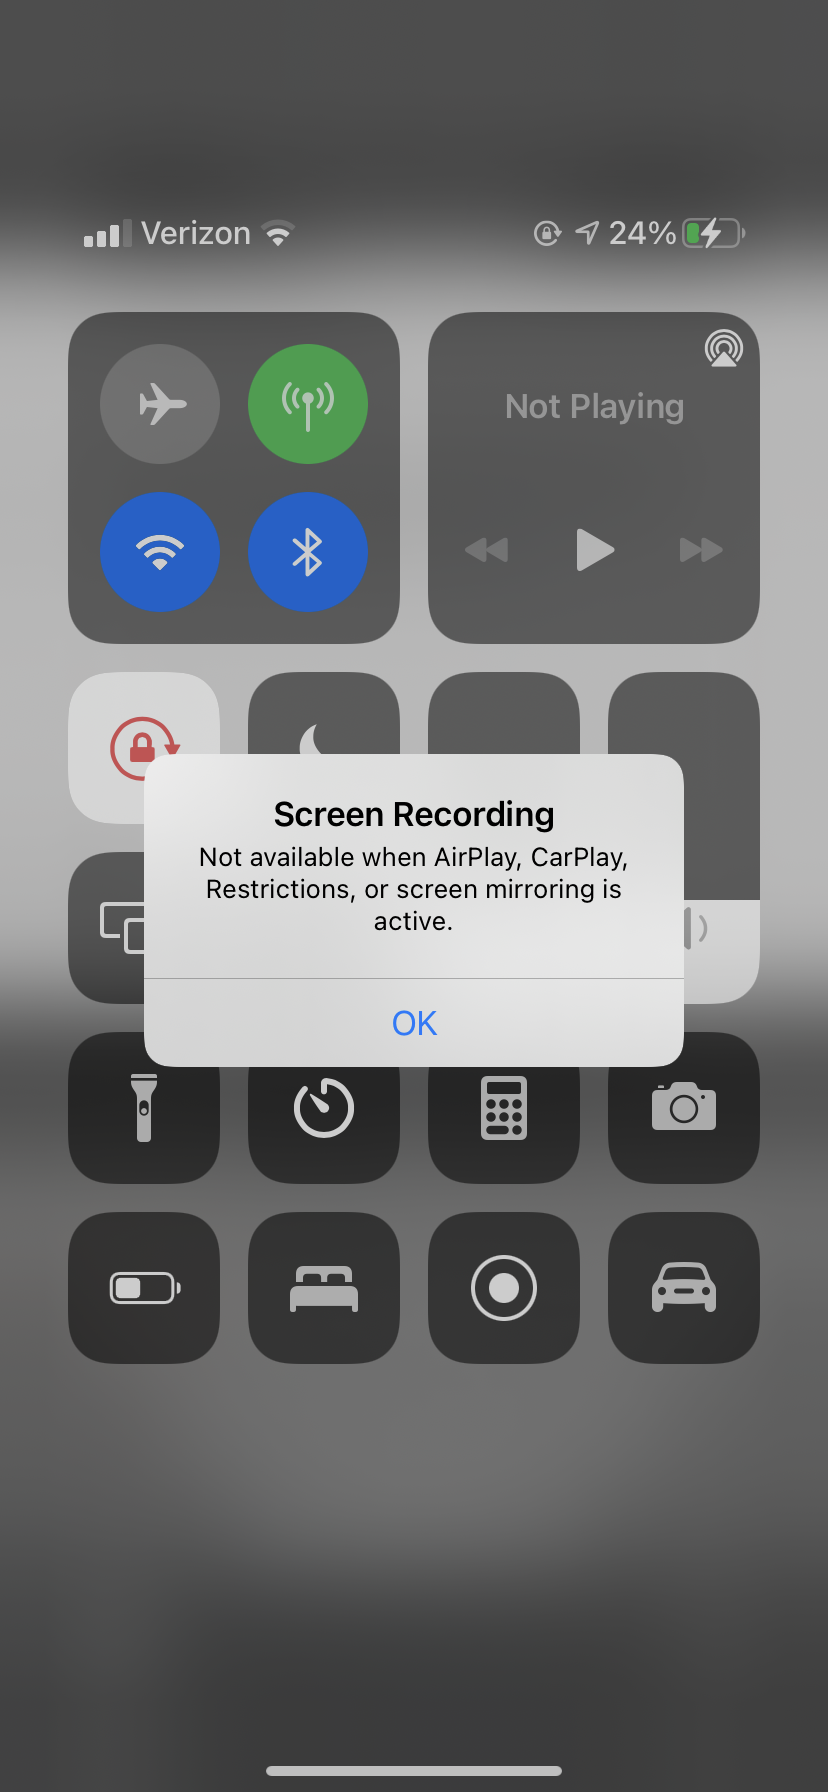 Screen Recording Apple Community, How To Turn Off Screen Recording And Mirroring On Ipad